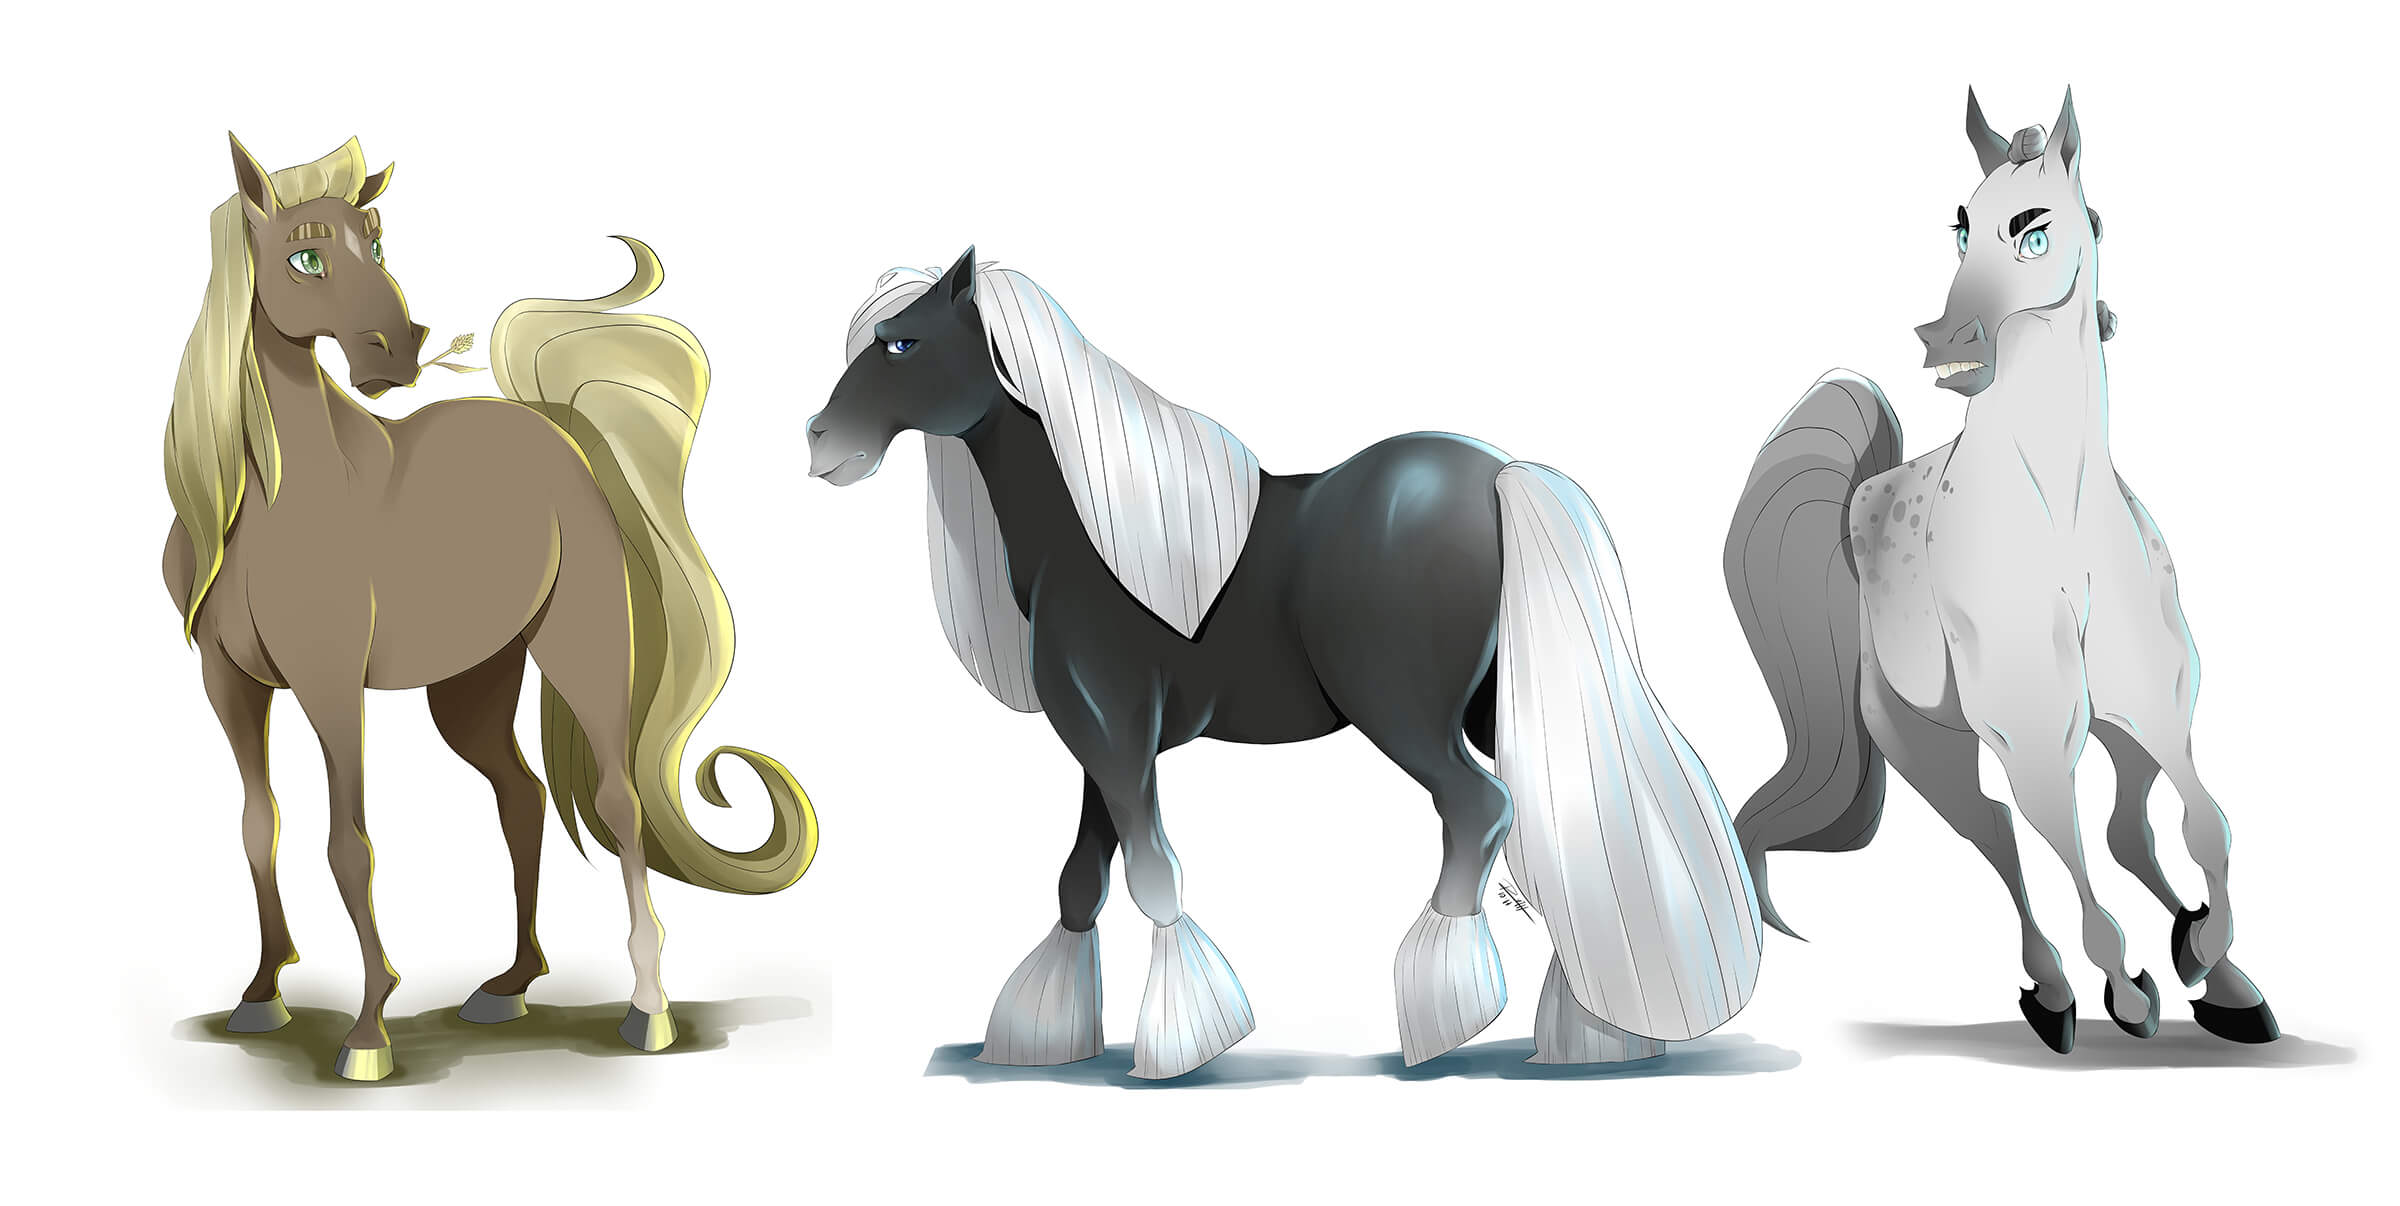 Digital painting of a brown, black, and white horse in cartoon stylization seen from various angles.